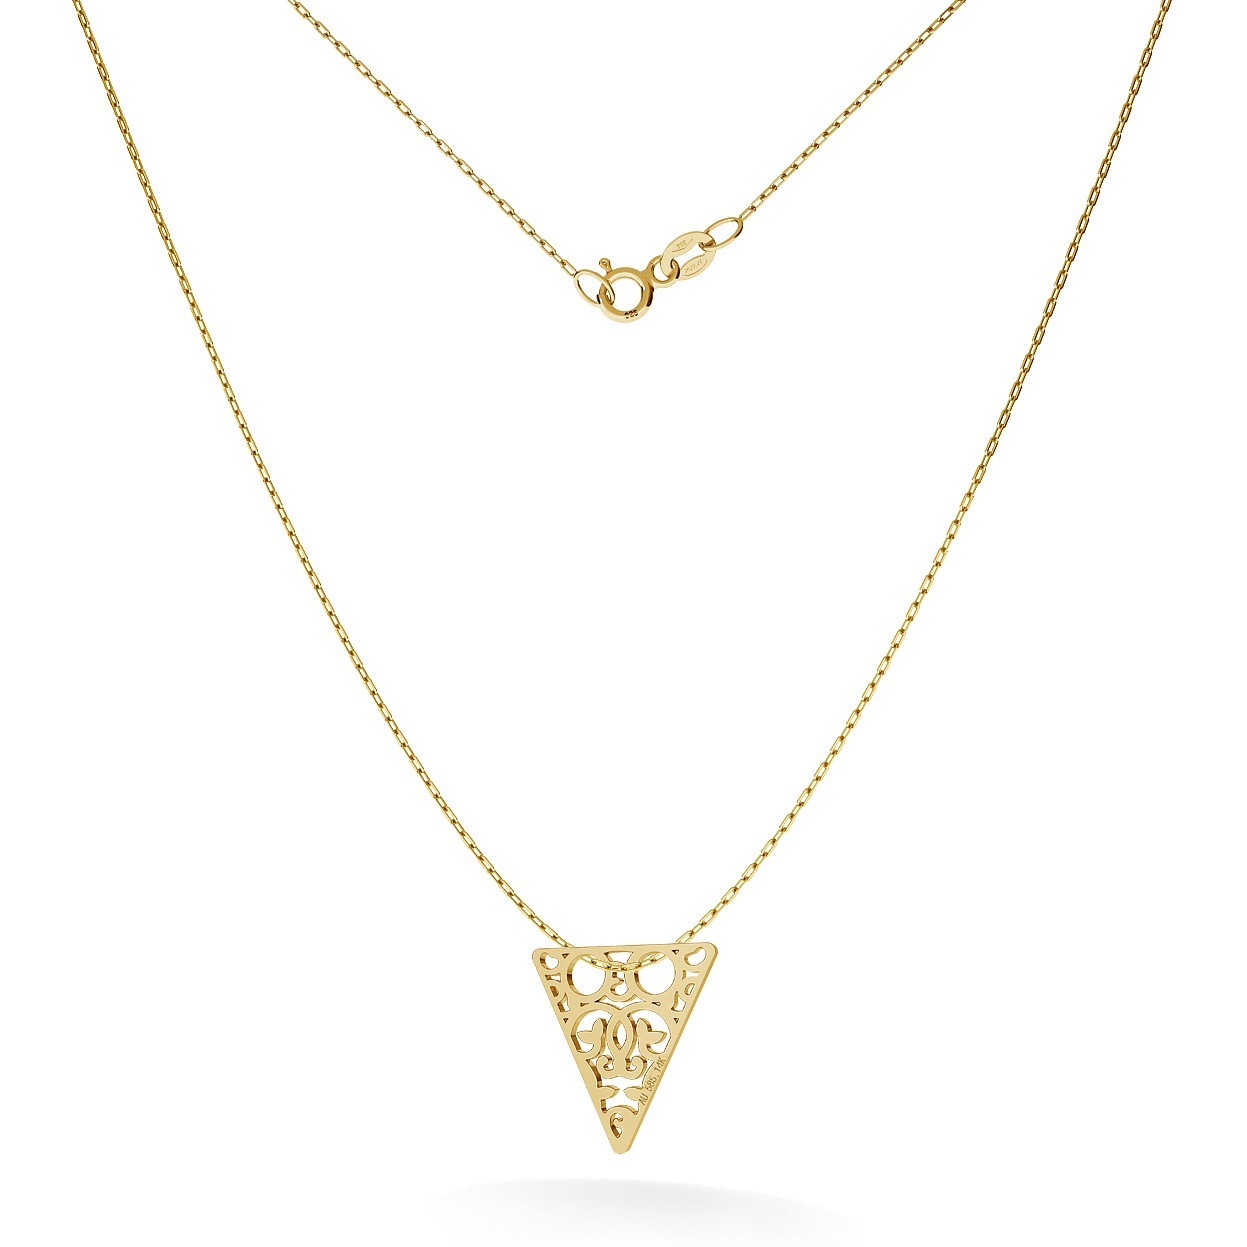 GOLD OPENWORK TRIANGLE NECKLACE 14K, MODEL 8